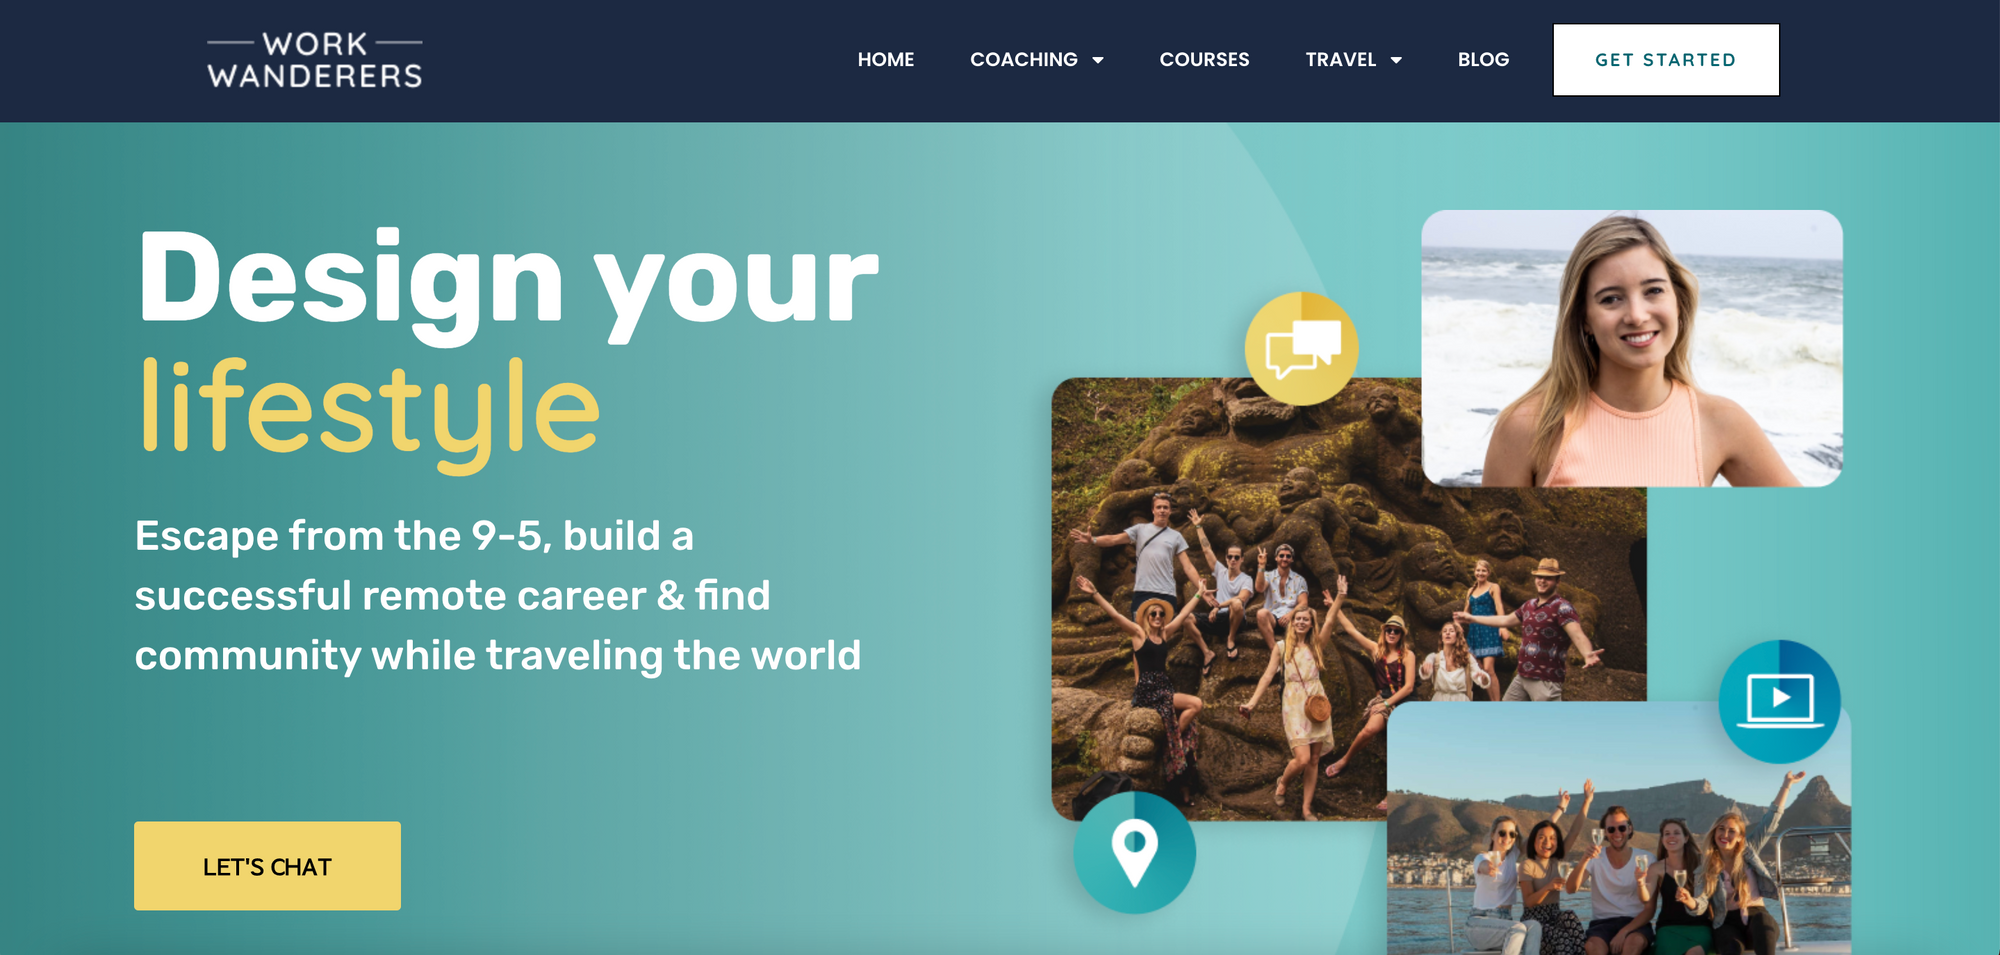 work wanderers, a website for remote work travel programs